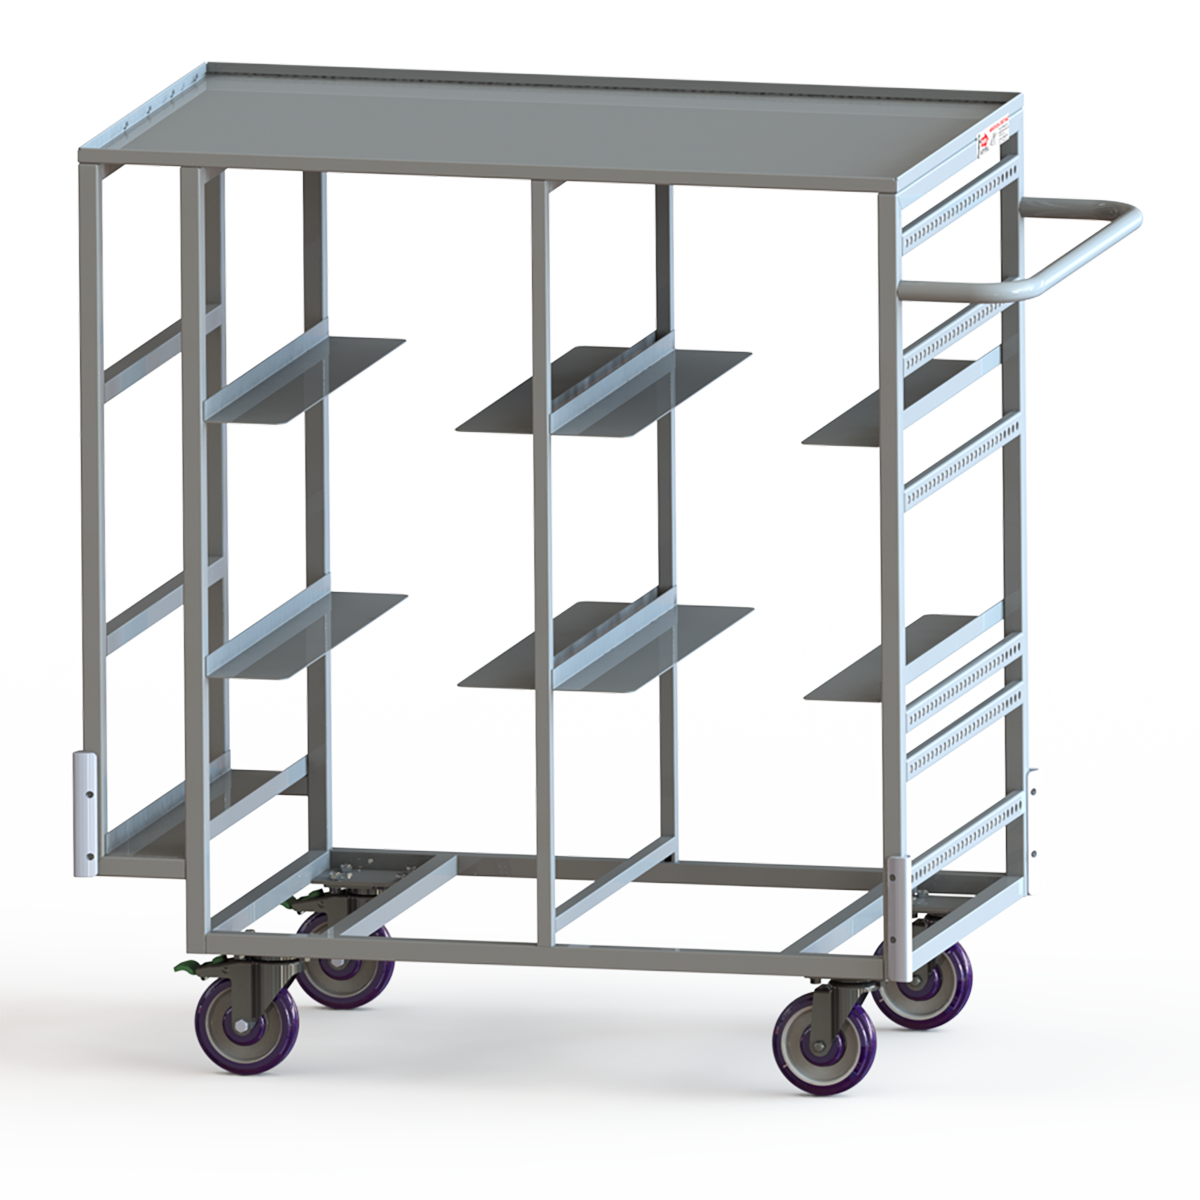 6 Tote Stocking Picking Cart with handle tote cart picking cart manufacturing cart industrial cart Tote DC Pick Cart six tote picking cart 6 Tote pick Cart | National Cart Co. Picking Cart distribution fulfilment Material handling INDUSTRIAL CARTS, picking cart, grocery cart grocery picking cart, department store cart, beverage cart ecom cart, ecommerce cart, ecommerce picking cart